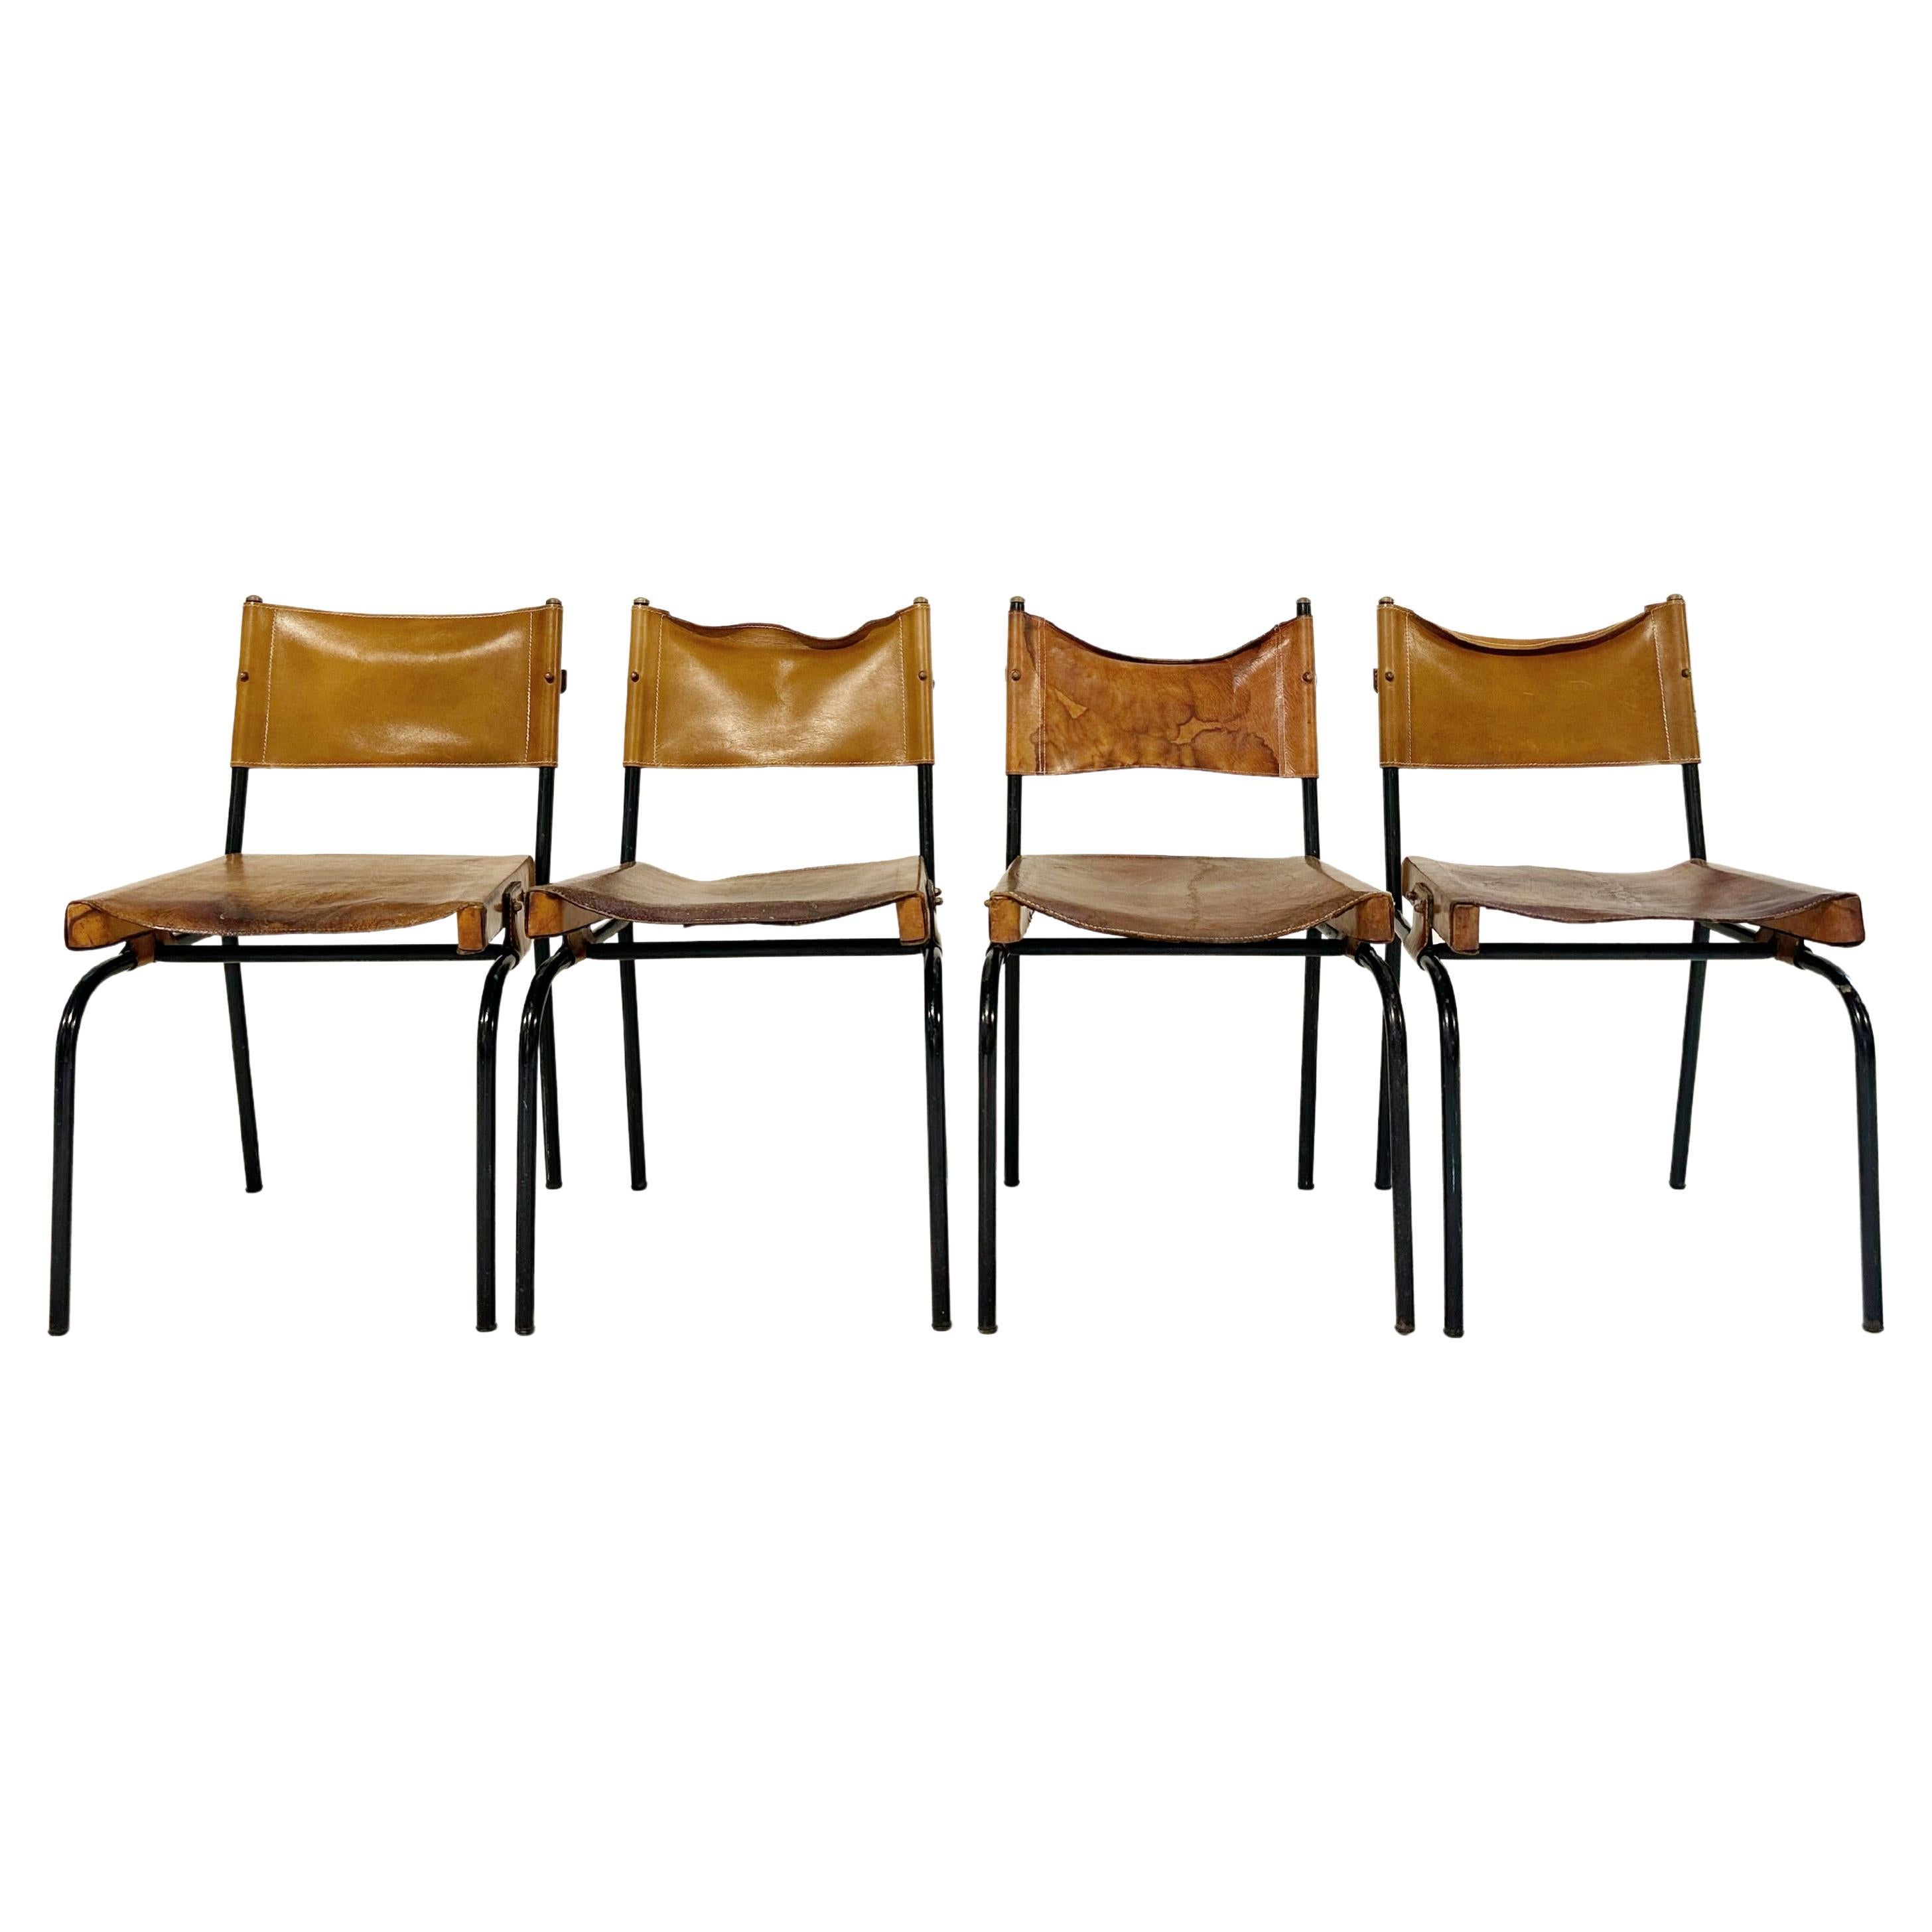 Vintage Jacques Adnet Leather Side Chairs, Set of 4 For Sale